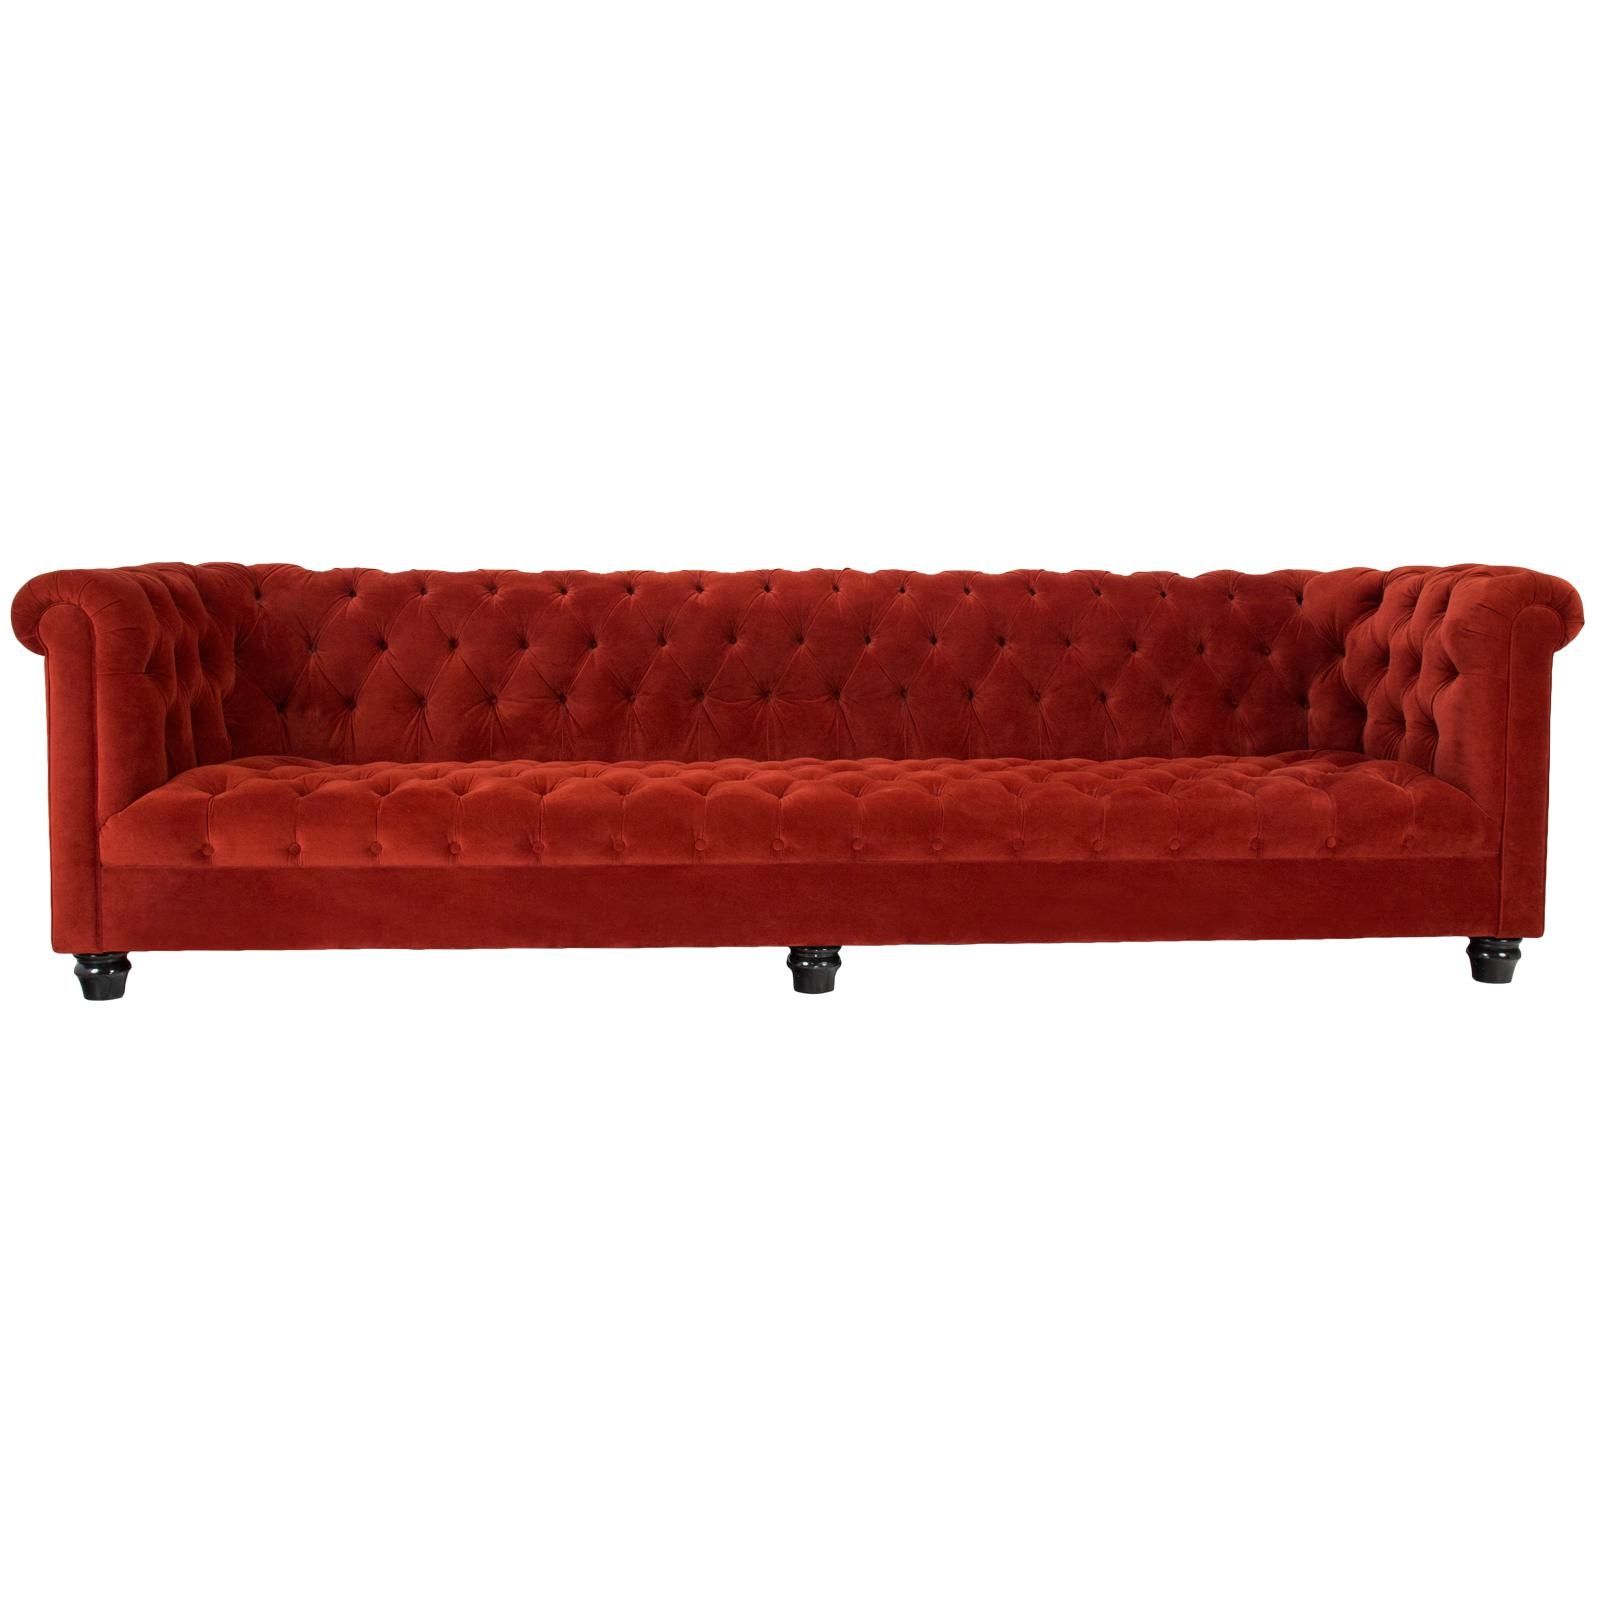 Tufted Sofa Rentals | Event Furniture Rental Within Manchester Sofas (View 9 of 20)